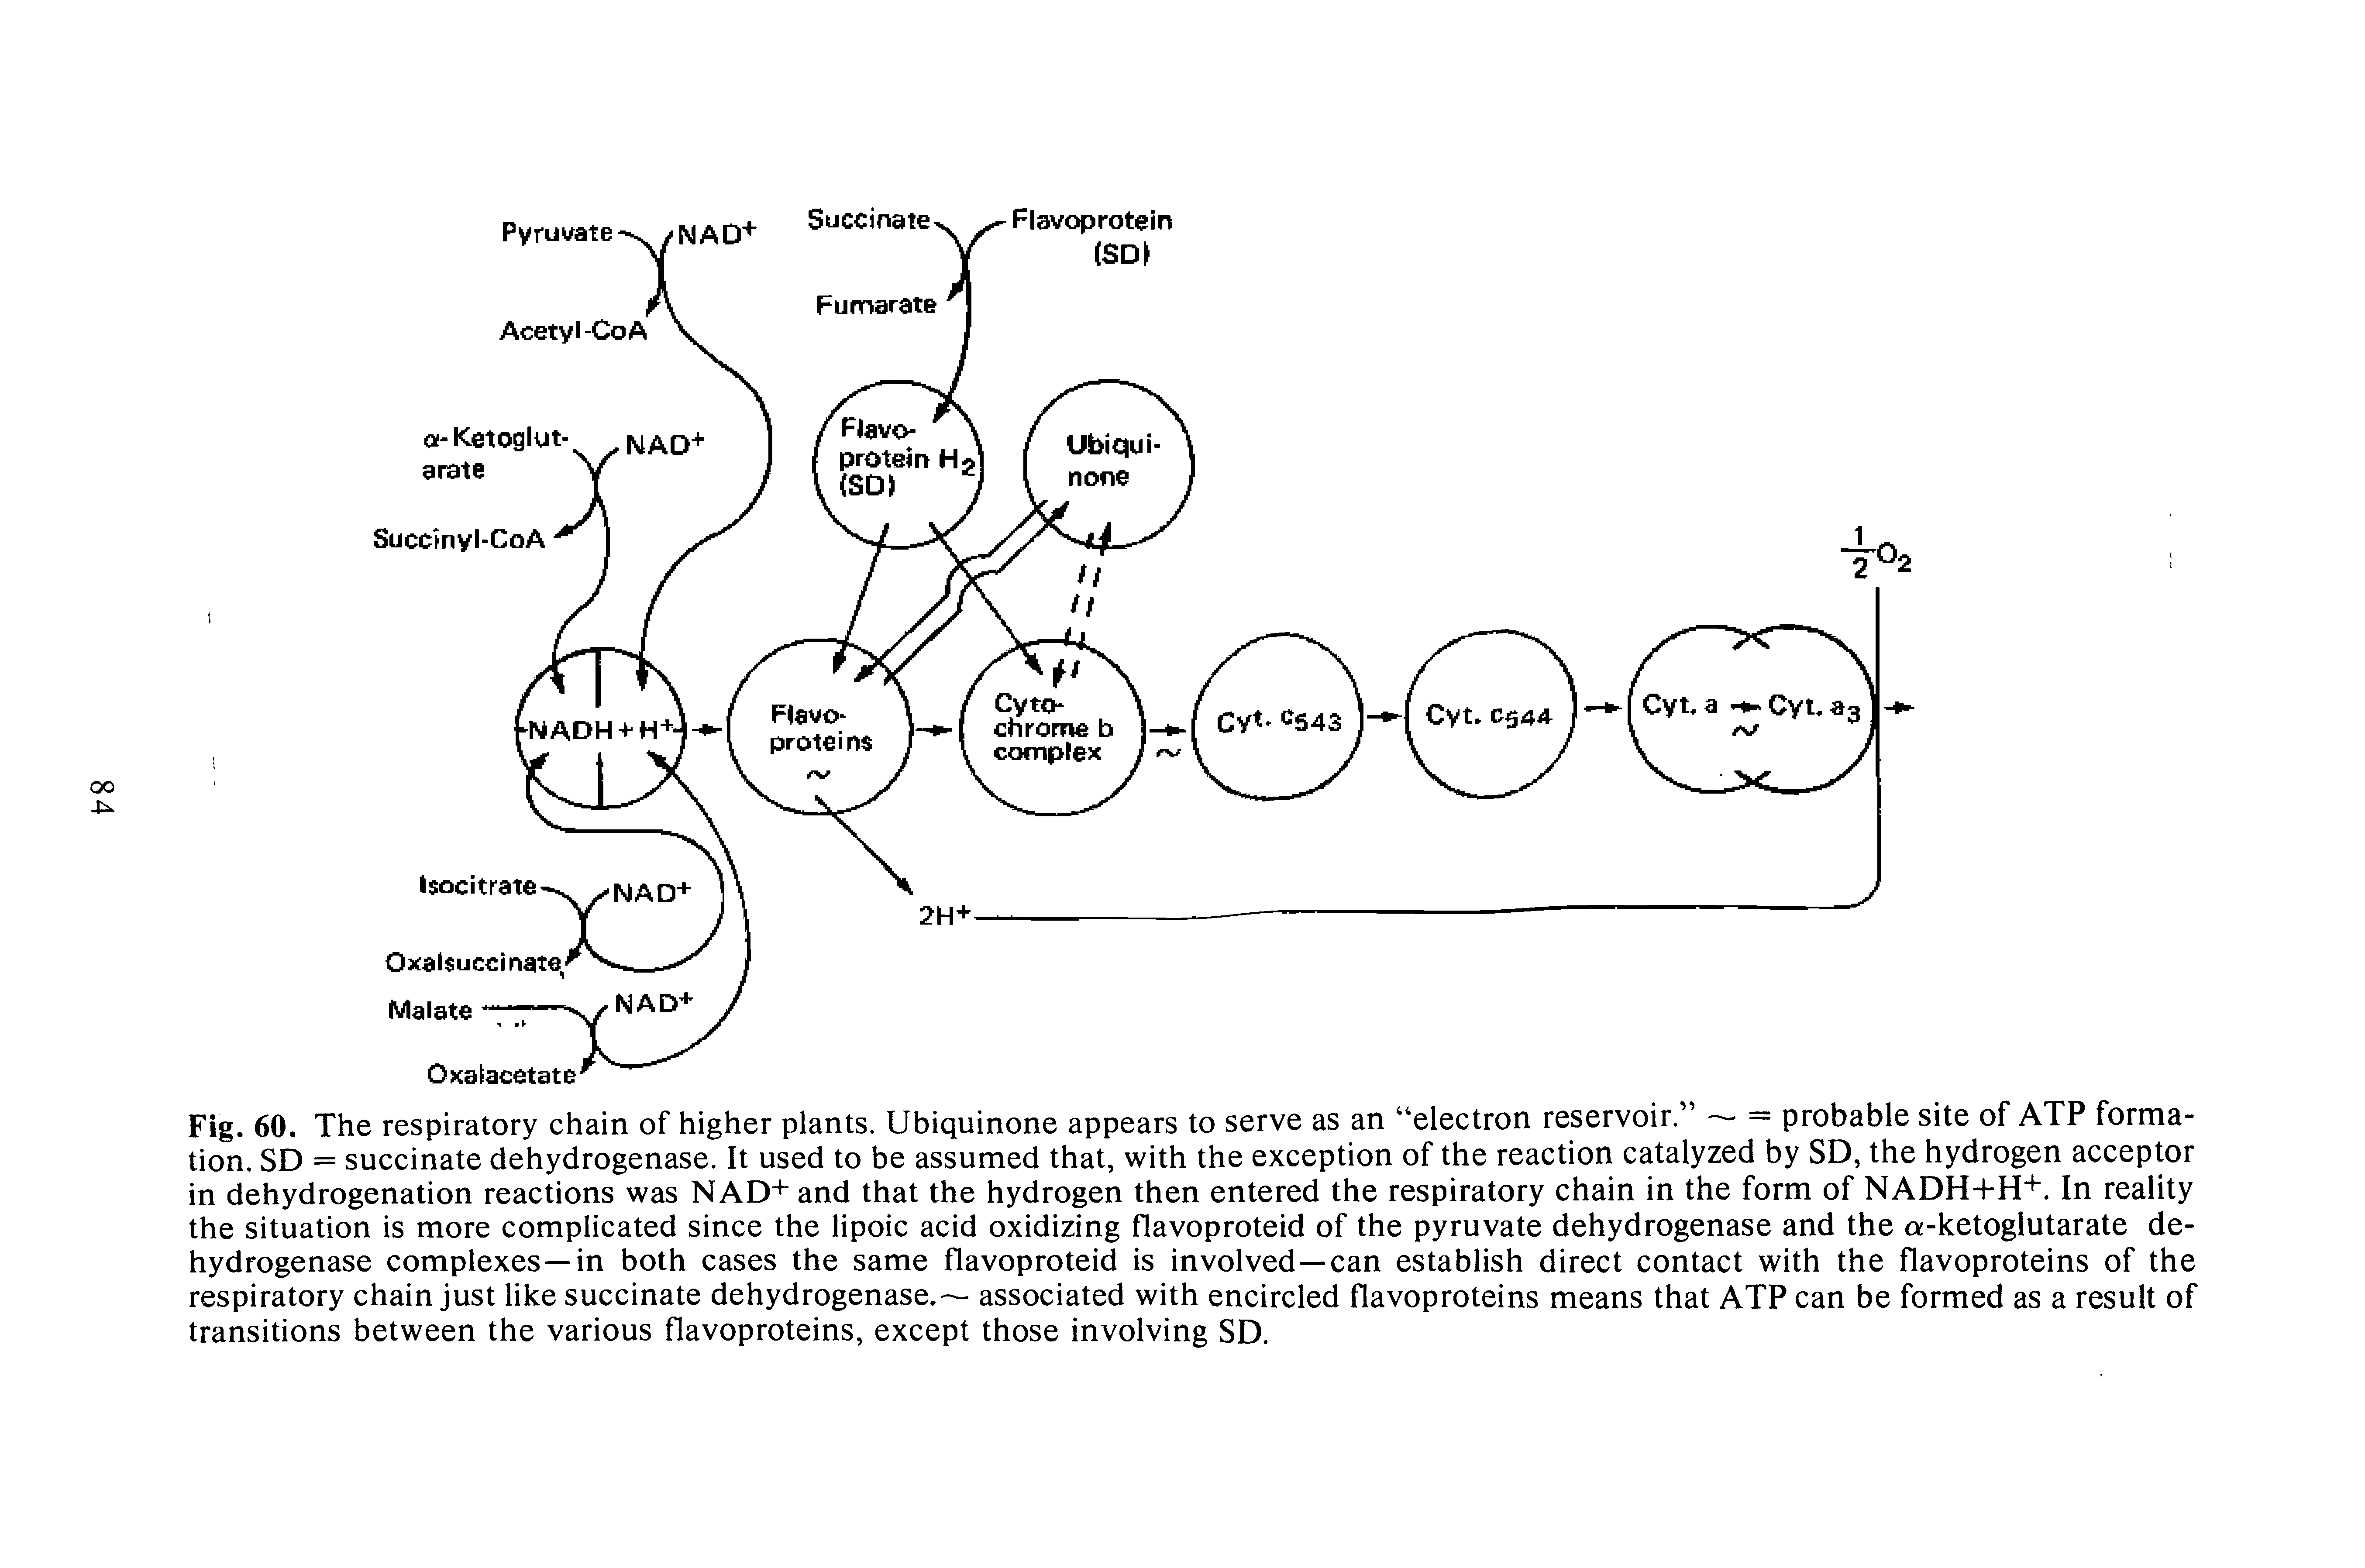 Fig. 60. The respiratory chain of higher plants. Ubiquinone appears to serve as an electron reservoir. = probable site of ATP formation. SD = succinate dehydrogenase. It used to be assumed that, with the exception of the reaction catalyzed by SD, the hydrogen acceptor in dehydrogenation reactions was NAD+ and that the hydrogen then entered the respiratory chain in the form of NADH+H+. In reality the situation is more complicated since the lipoic acid oxidizing flavoproteid of the pyruvate dehydrogenase and the a-ketoglutarate dehydrogenase complexes—in both cases the same flavoproteid is involved—can establish direct contact with the flavoproteins of the respiratory chain just like succinate dehydrogenase. associated with encircled flavoproteins means that ATP can be formed as a result of transitions between the various flavoproteins, except those involving SD.